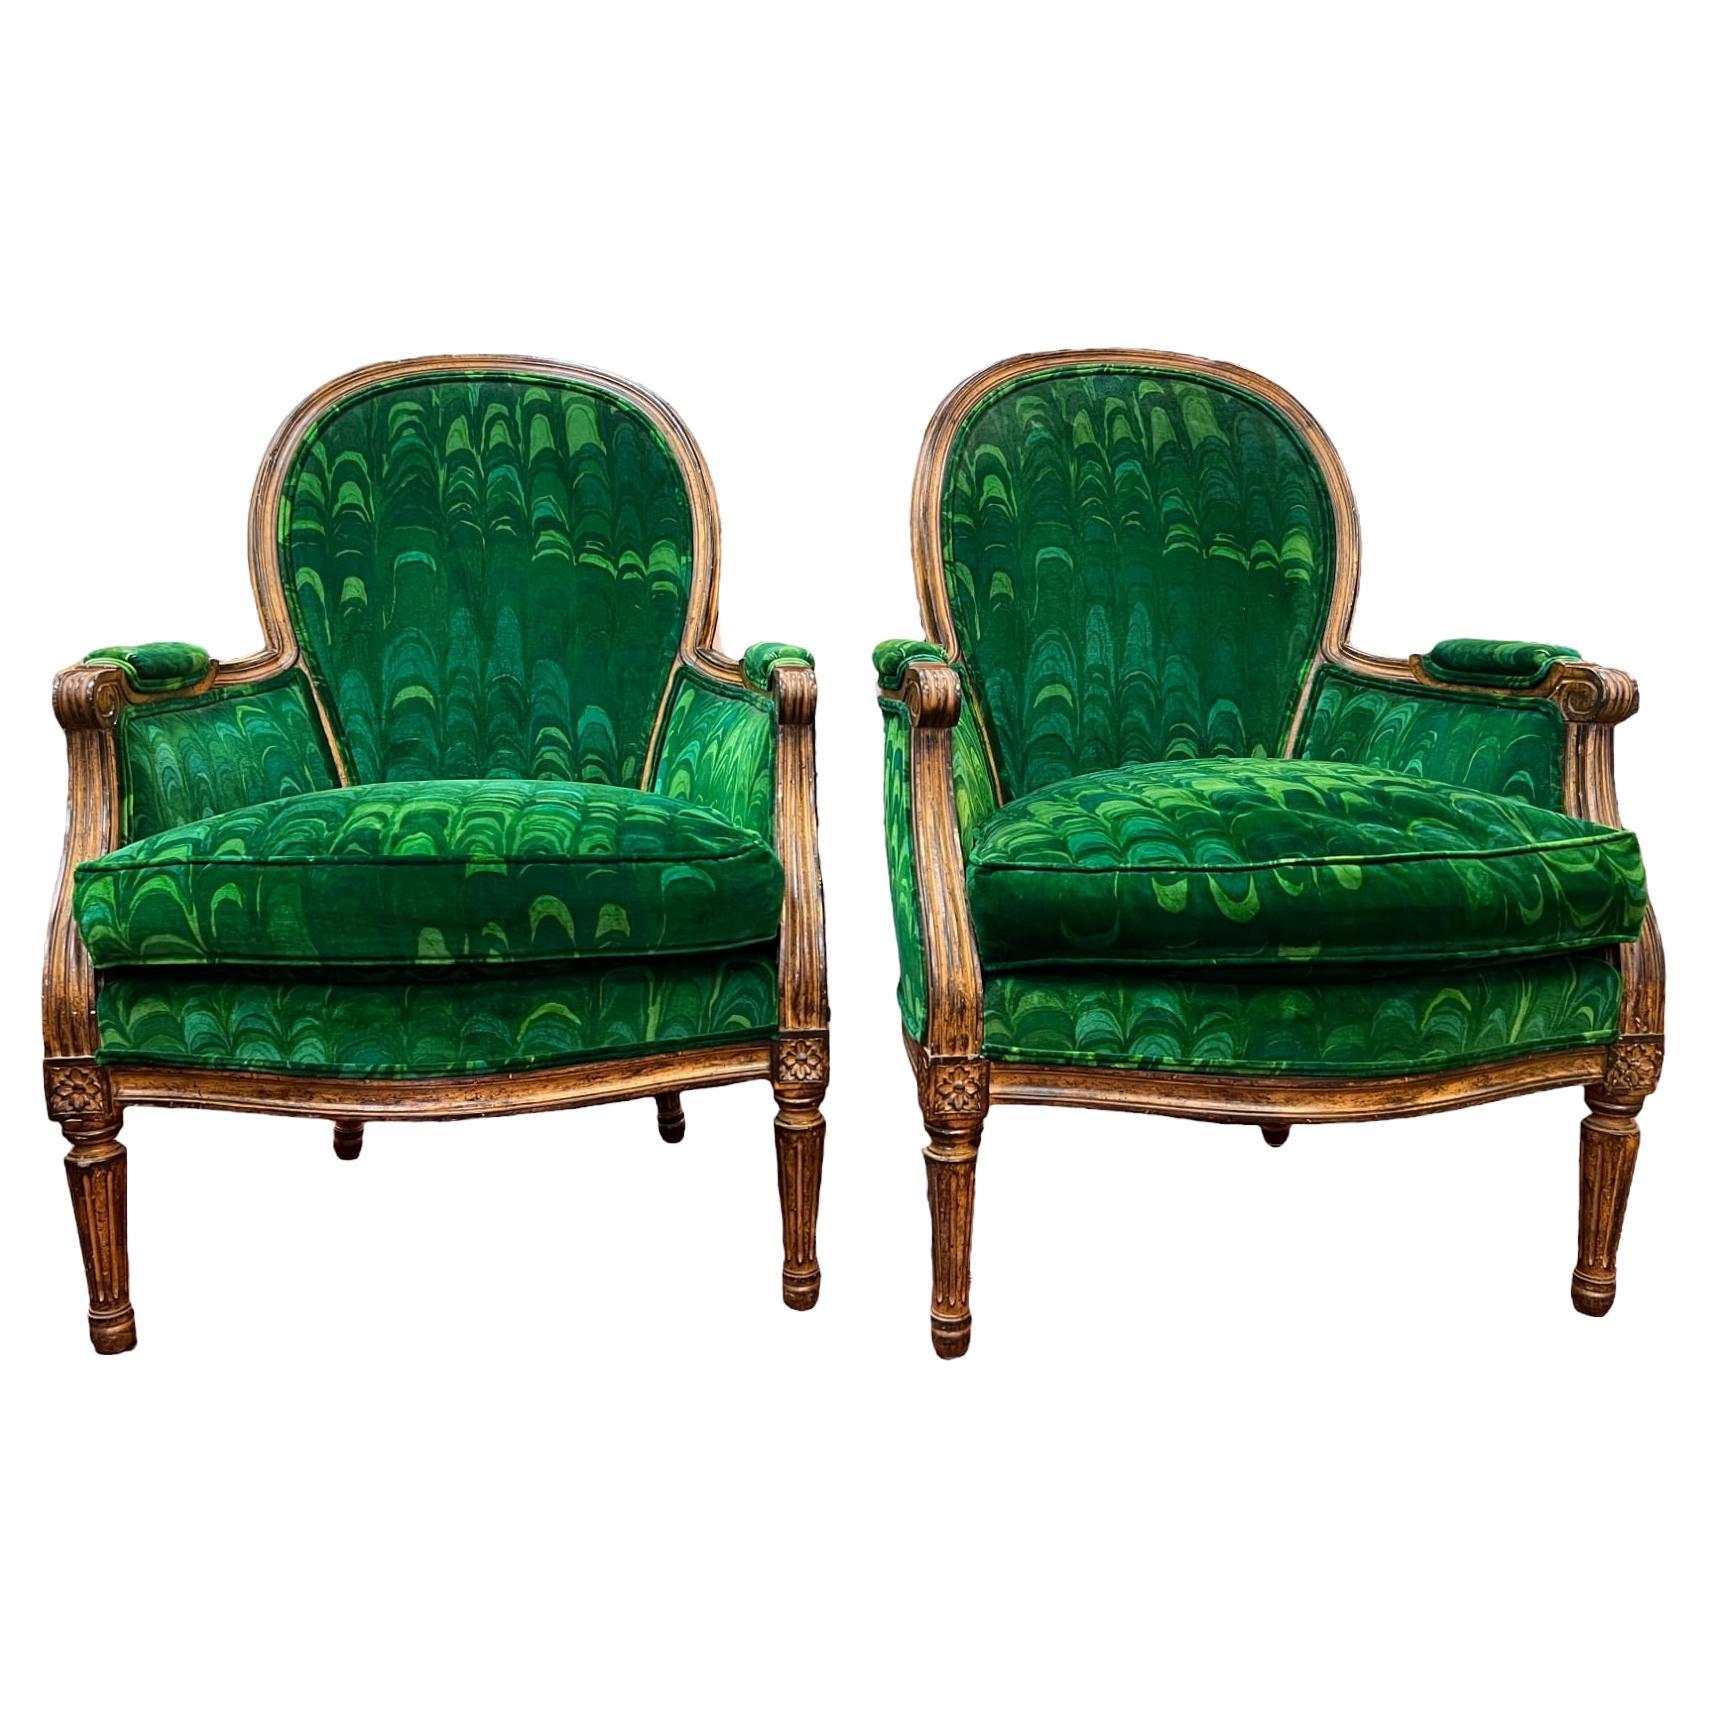 Pair of Louis XVI Style Fauteuil Arm Chairs by Lewis Mittman 